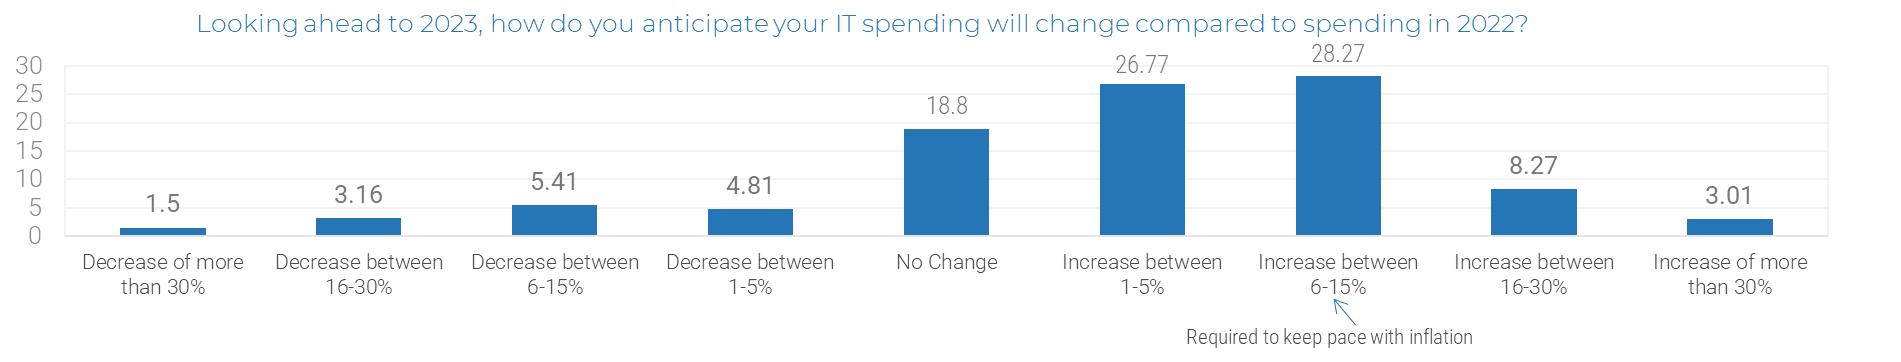 This is an image of anticipated changes to IT spending compared to 2022 for the following categories: Decrease of more than 30%; Decrease between 16-30%; Decrease between 6-15%; Decrease between 1-5%; No Change; Increase between 1-5%; Increase between 6-15%; Increase between 16-30%; Increase of more than 30%